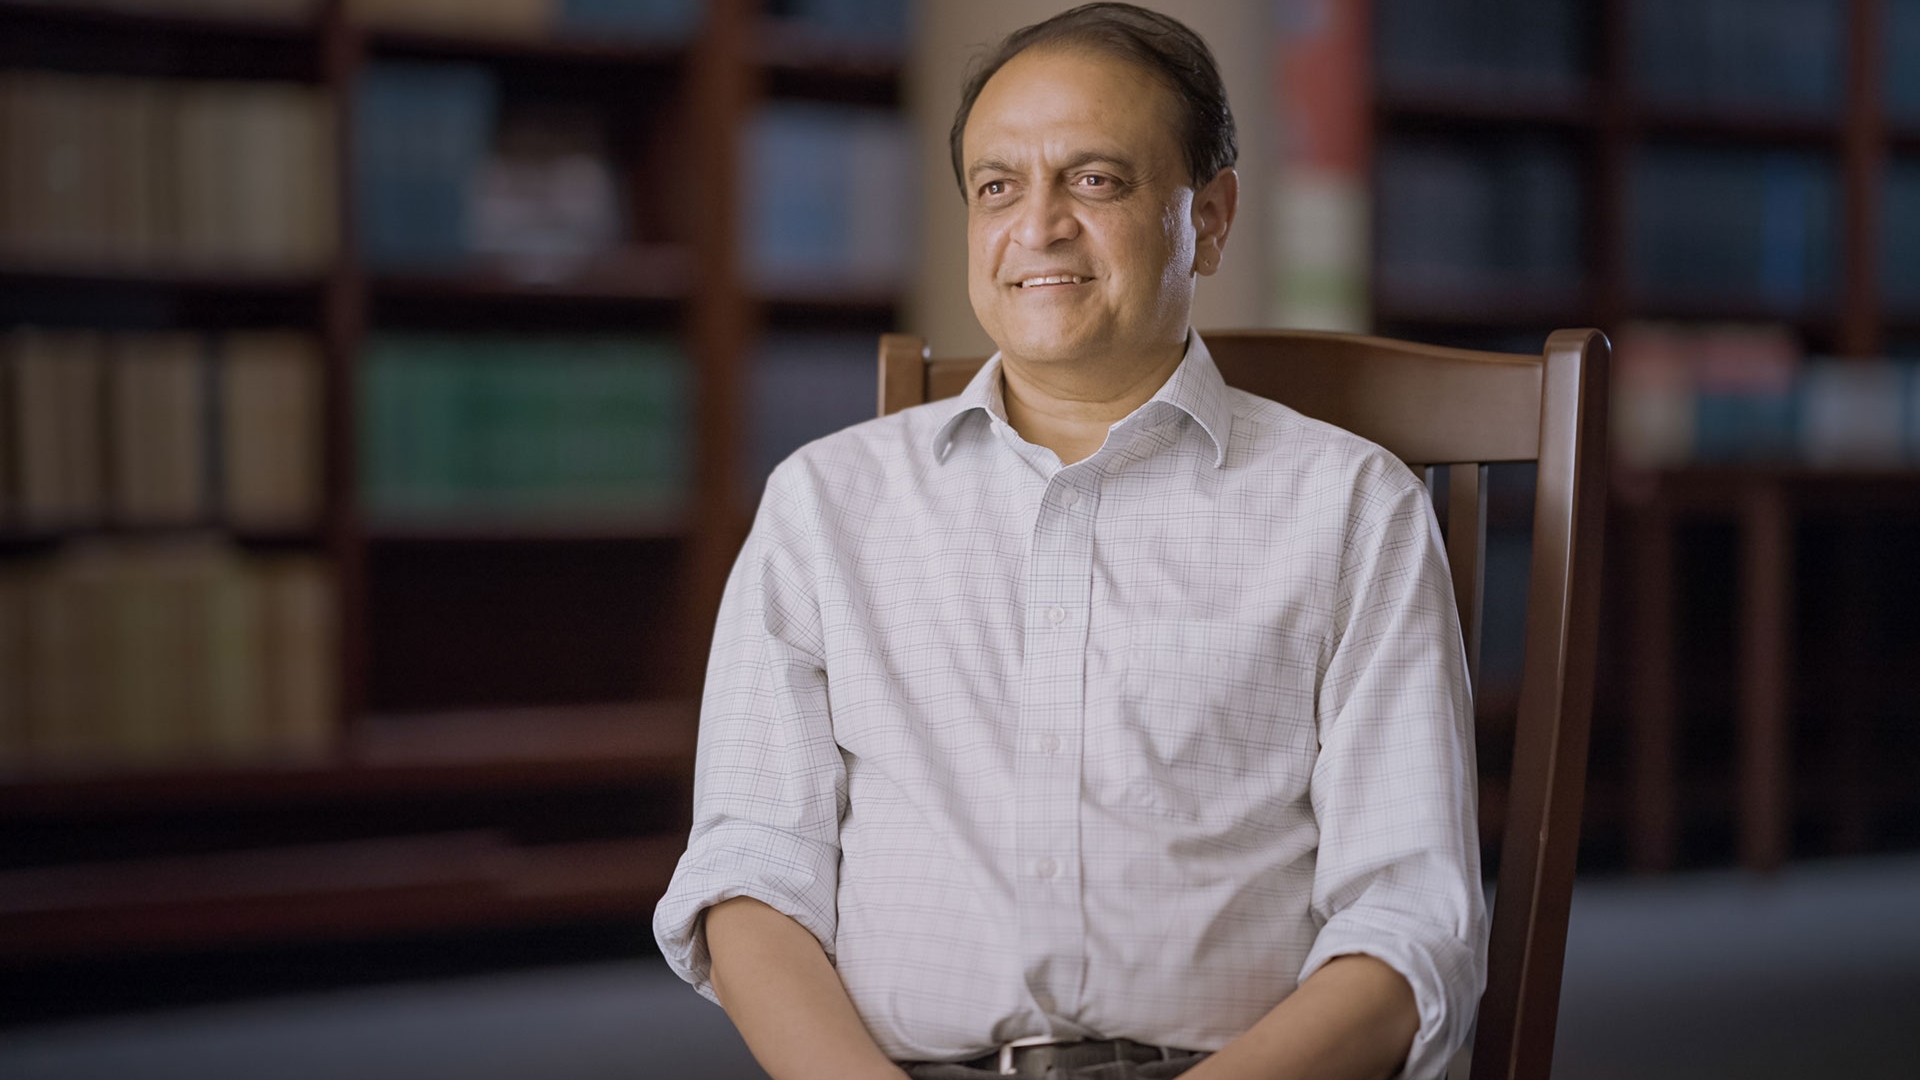 Interview with Nipam Patel, PHD, developmental biologist and director of the Marine Biological Laboratory, University of Chicago.